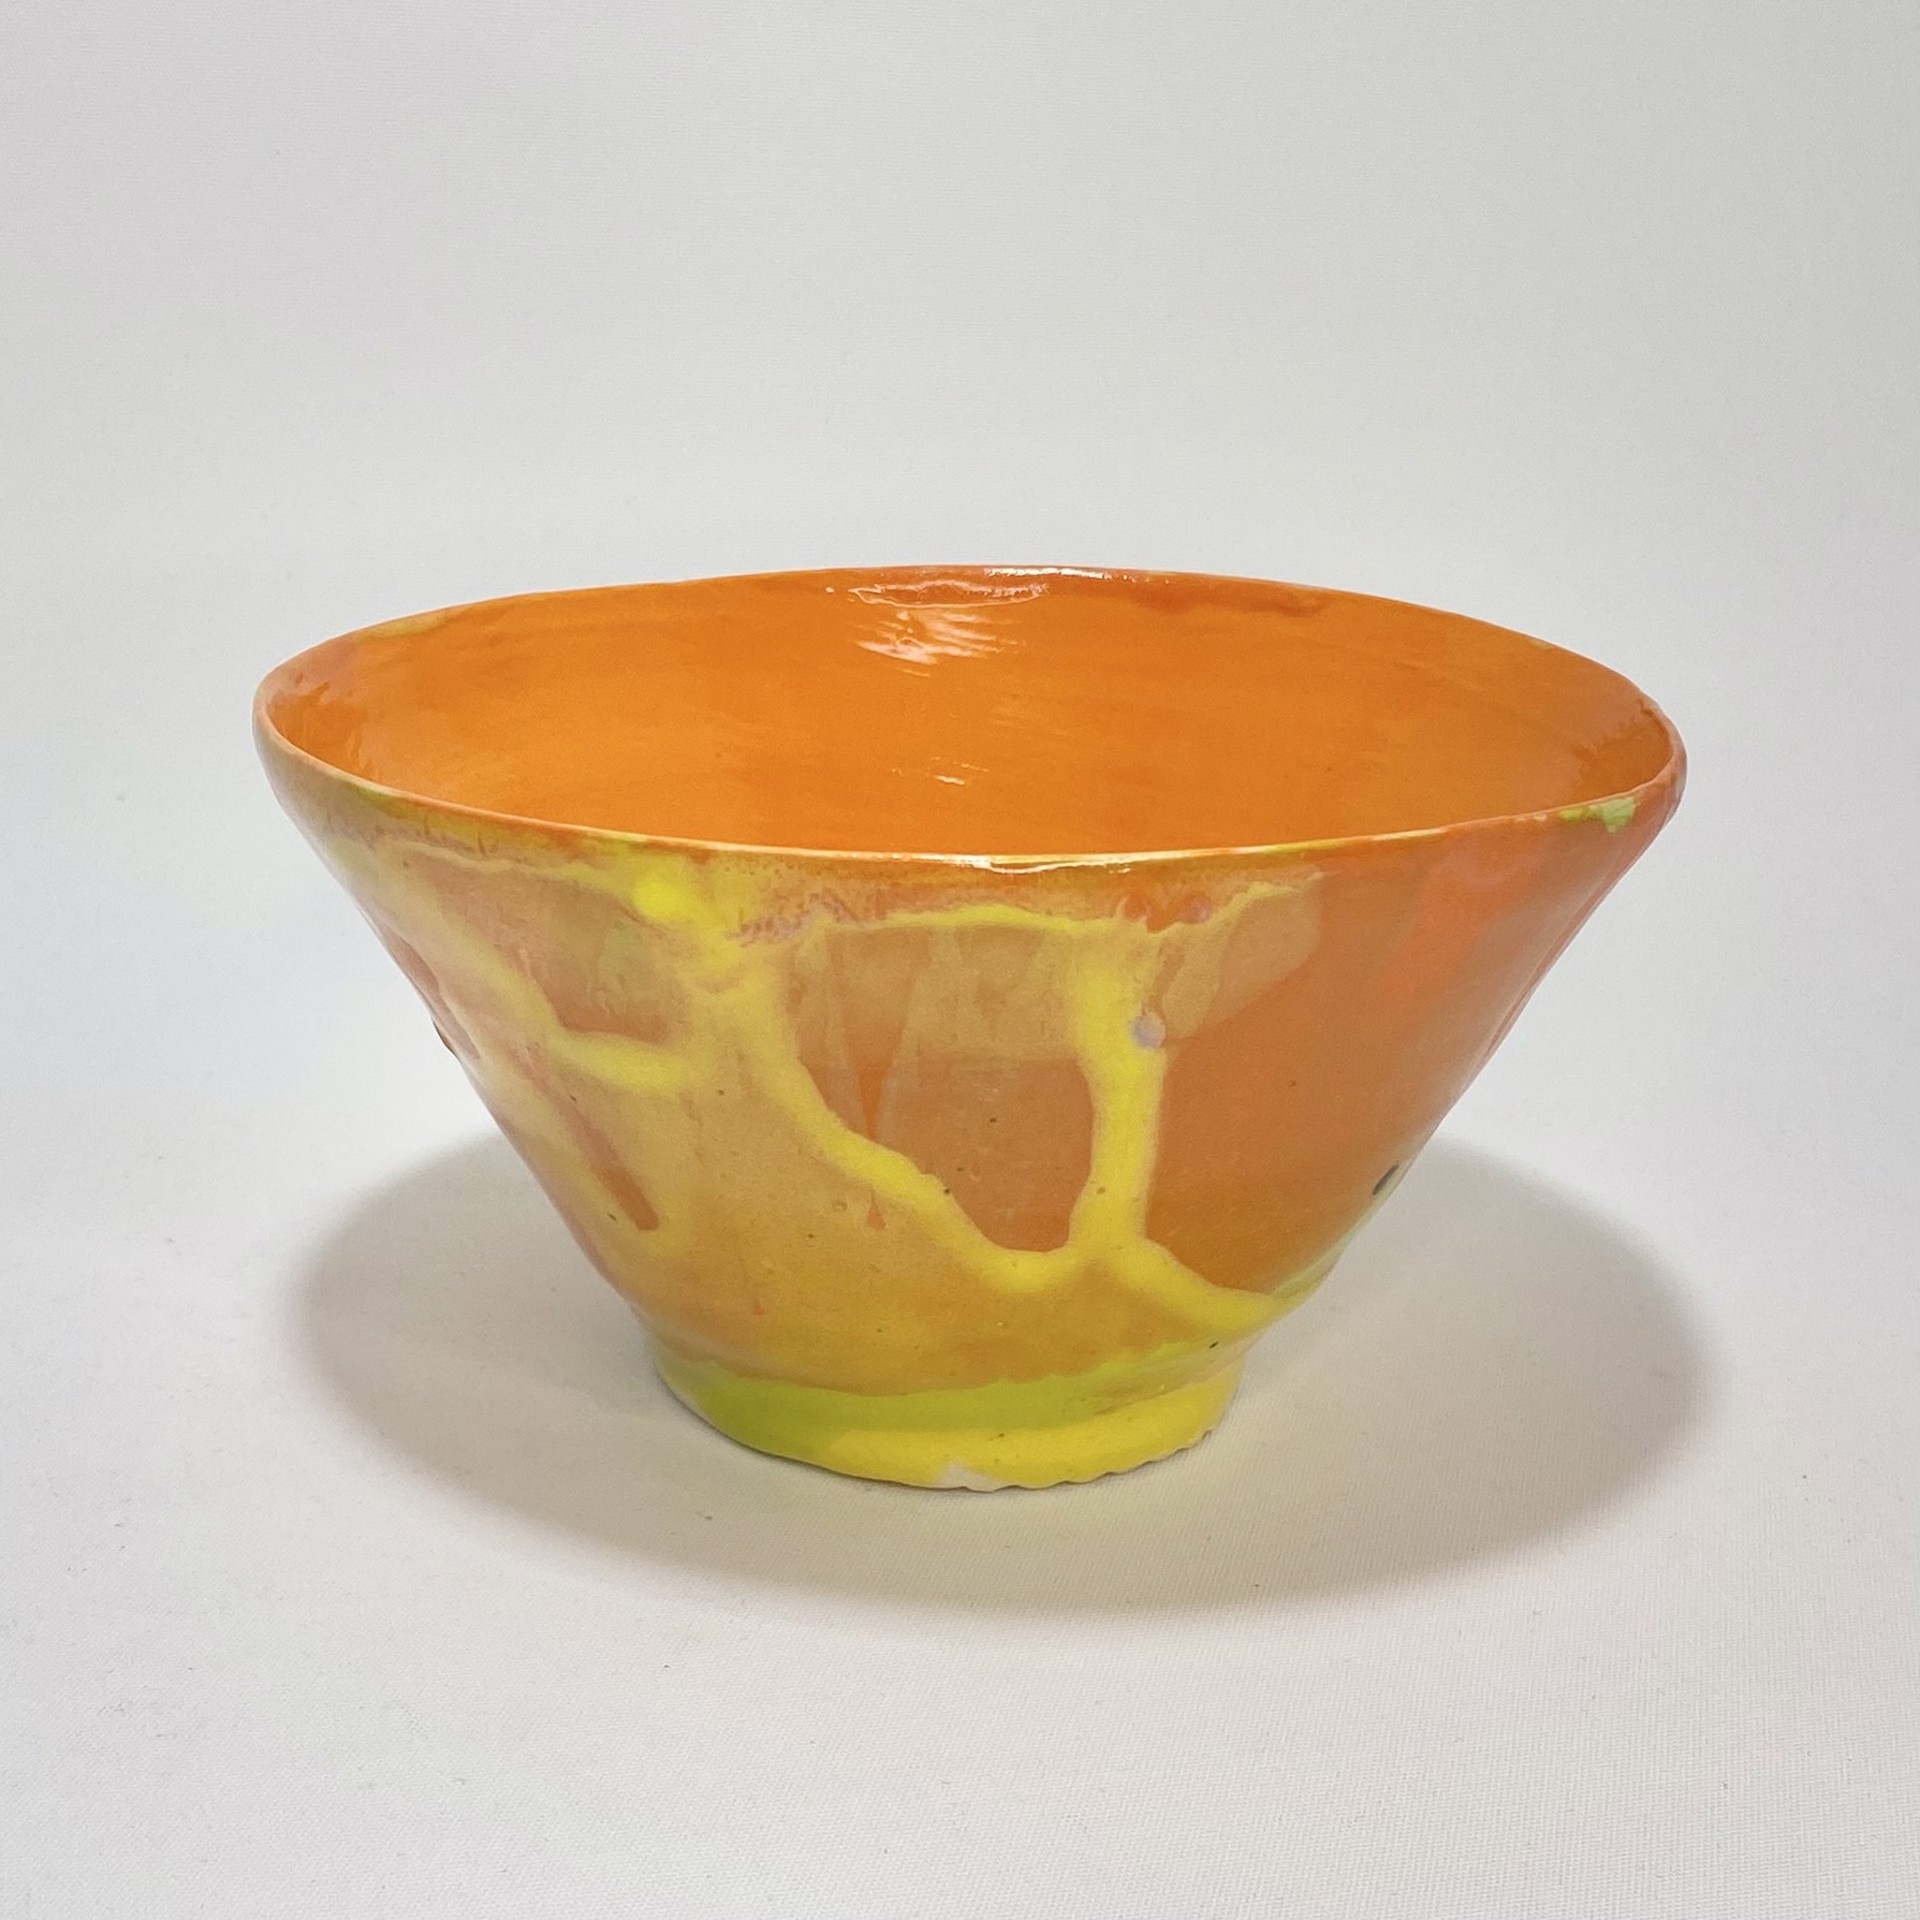 "Orange & Yellow Pour Bowl" by Justin S. by One Step Beyond